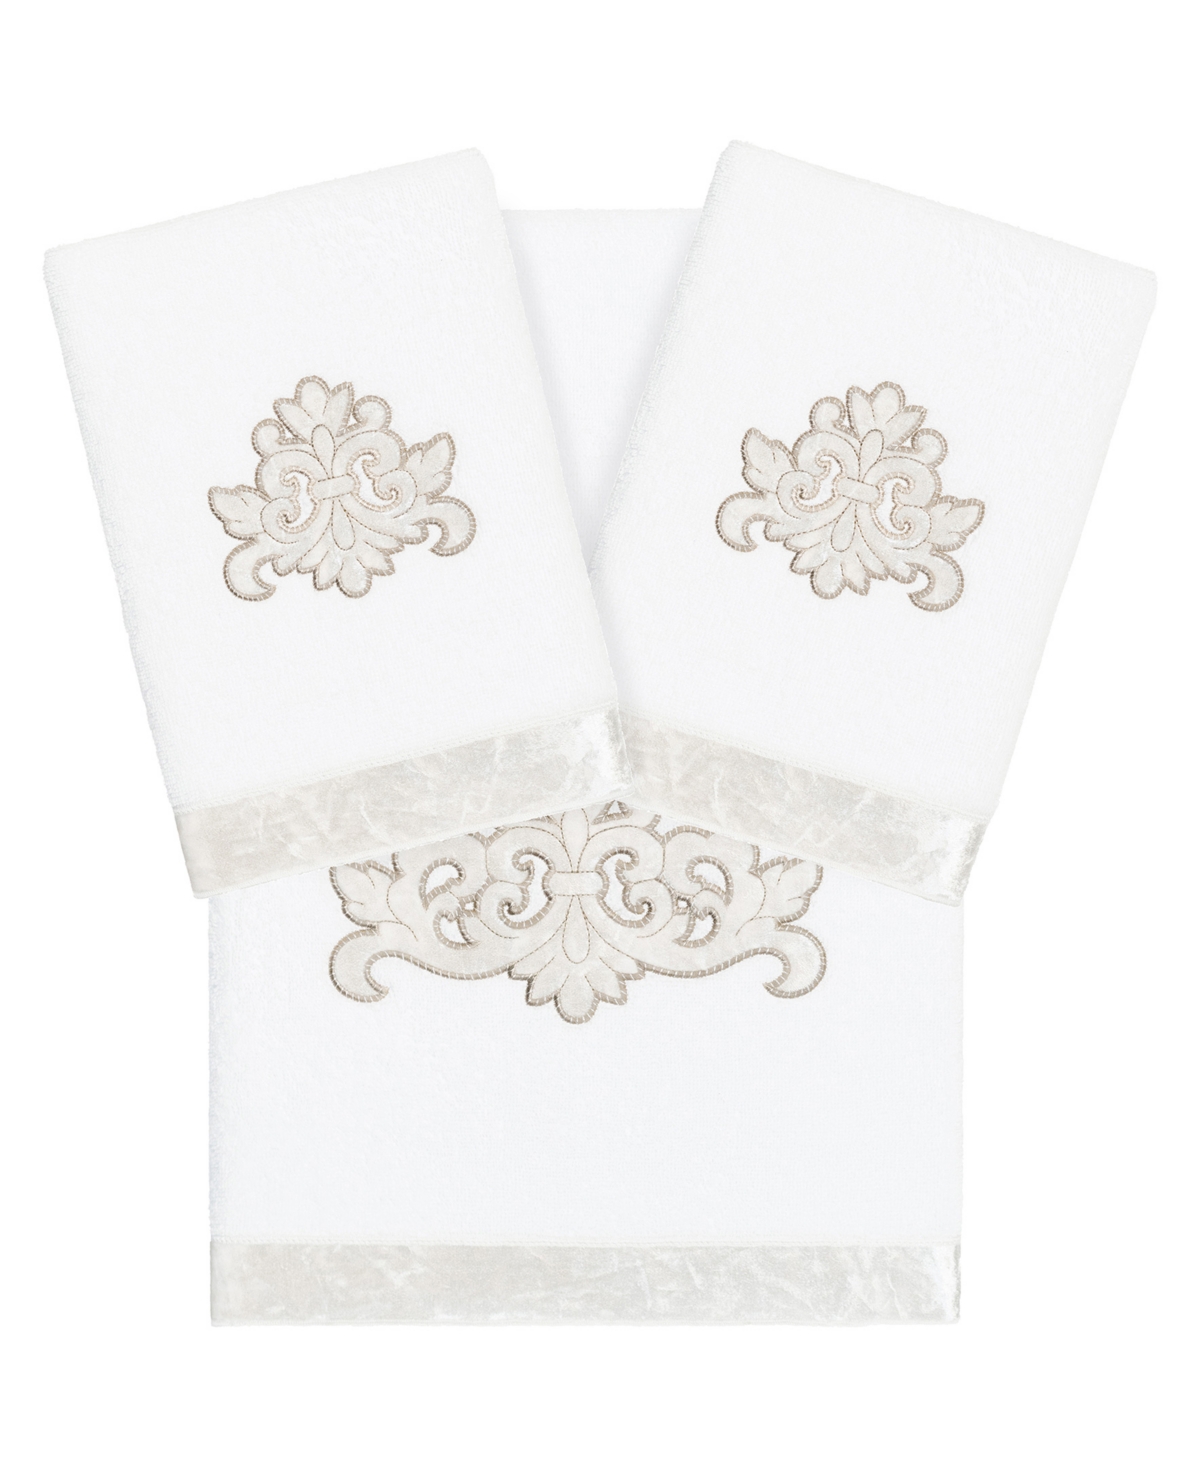 Linum Home Textiles Turkish Cotton May Embellished Towel Set, 3 Piece Bedding In White